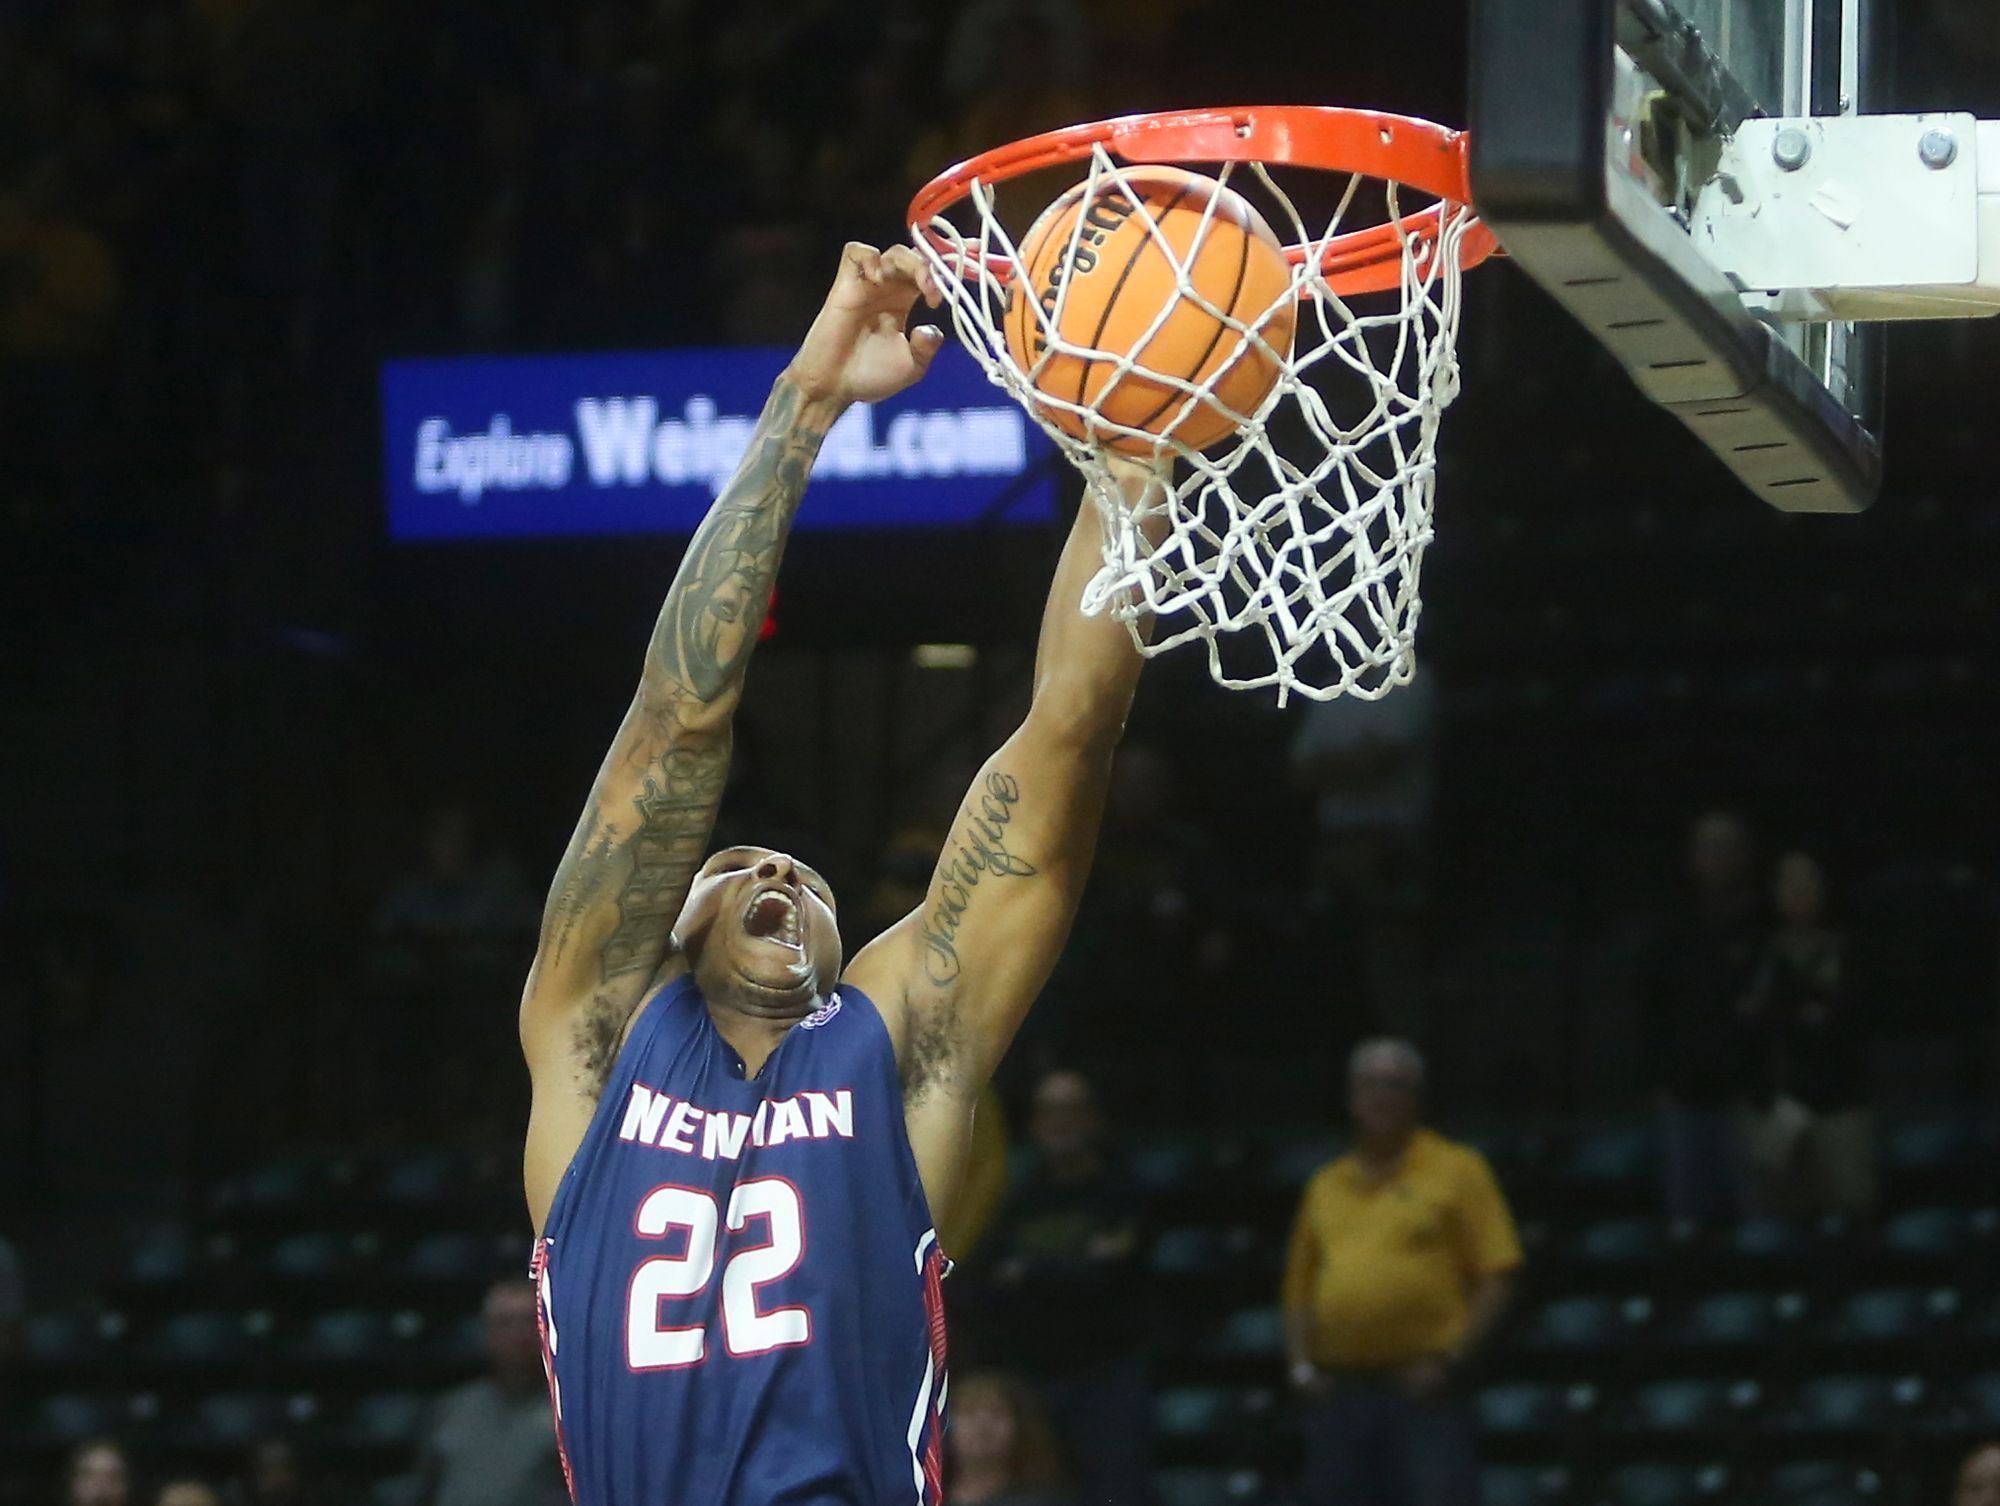 Newman starts strong but loses 83-52 to WSU